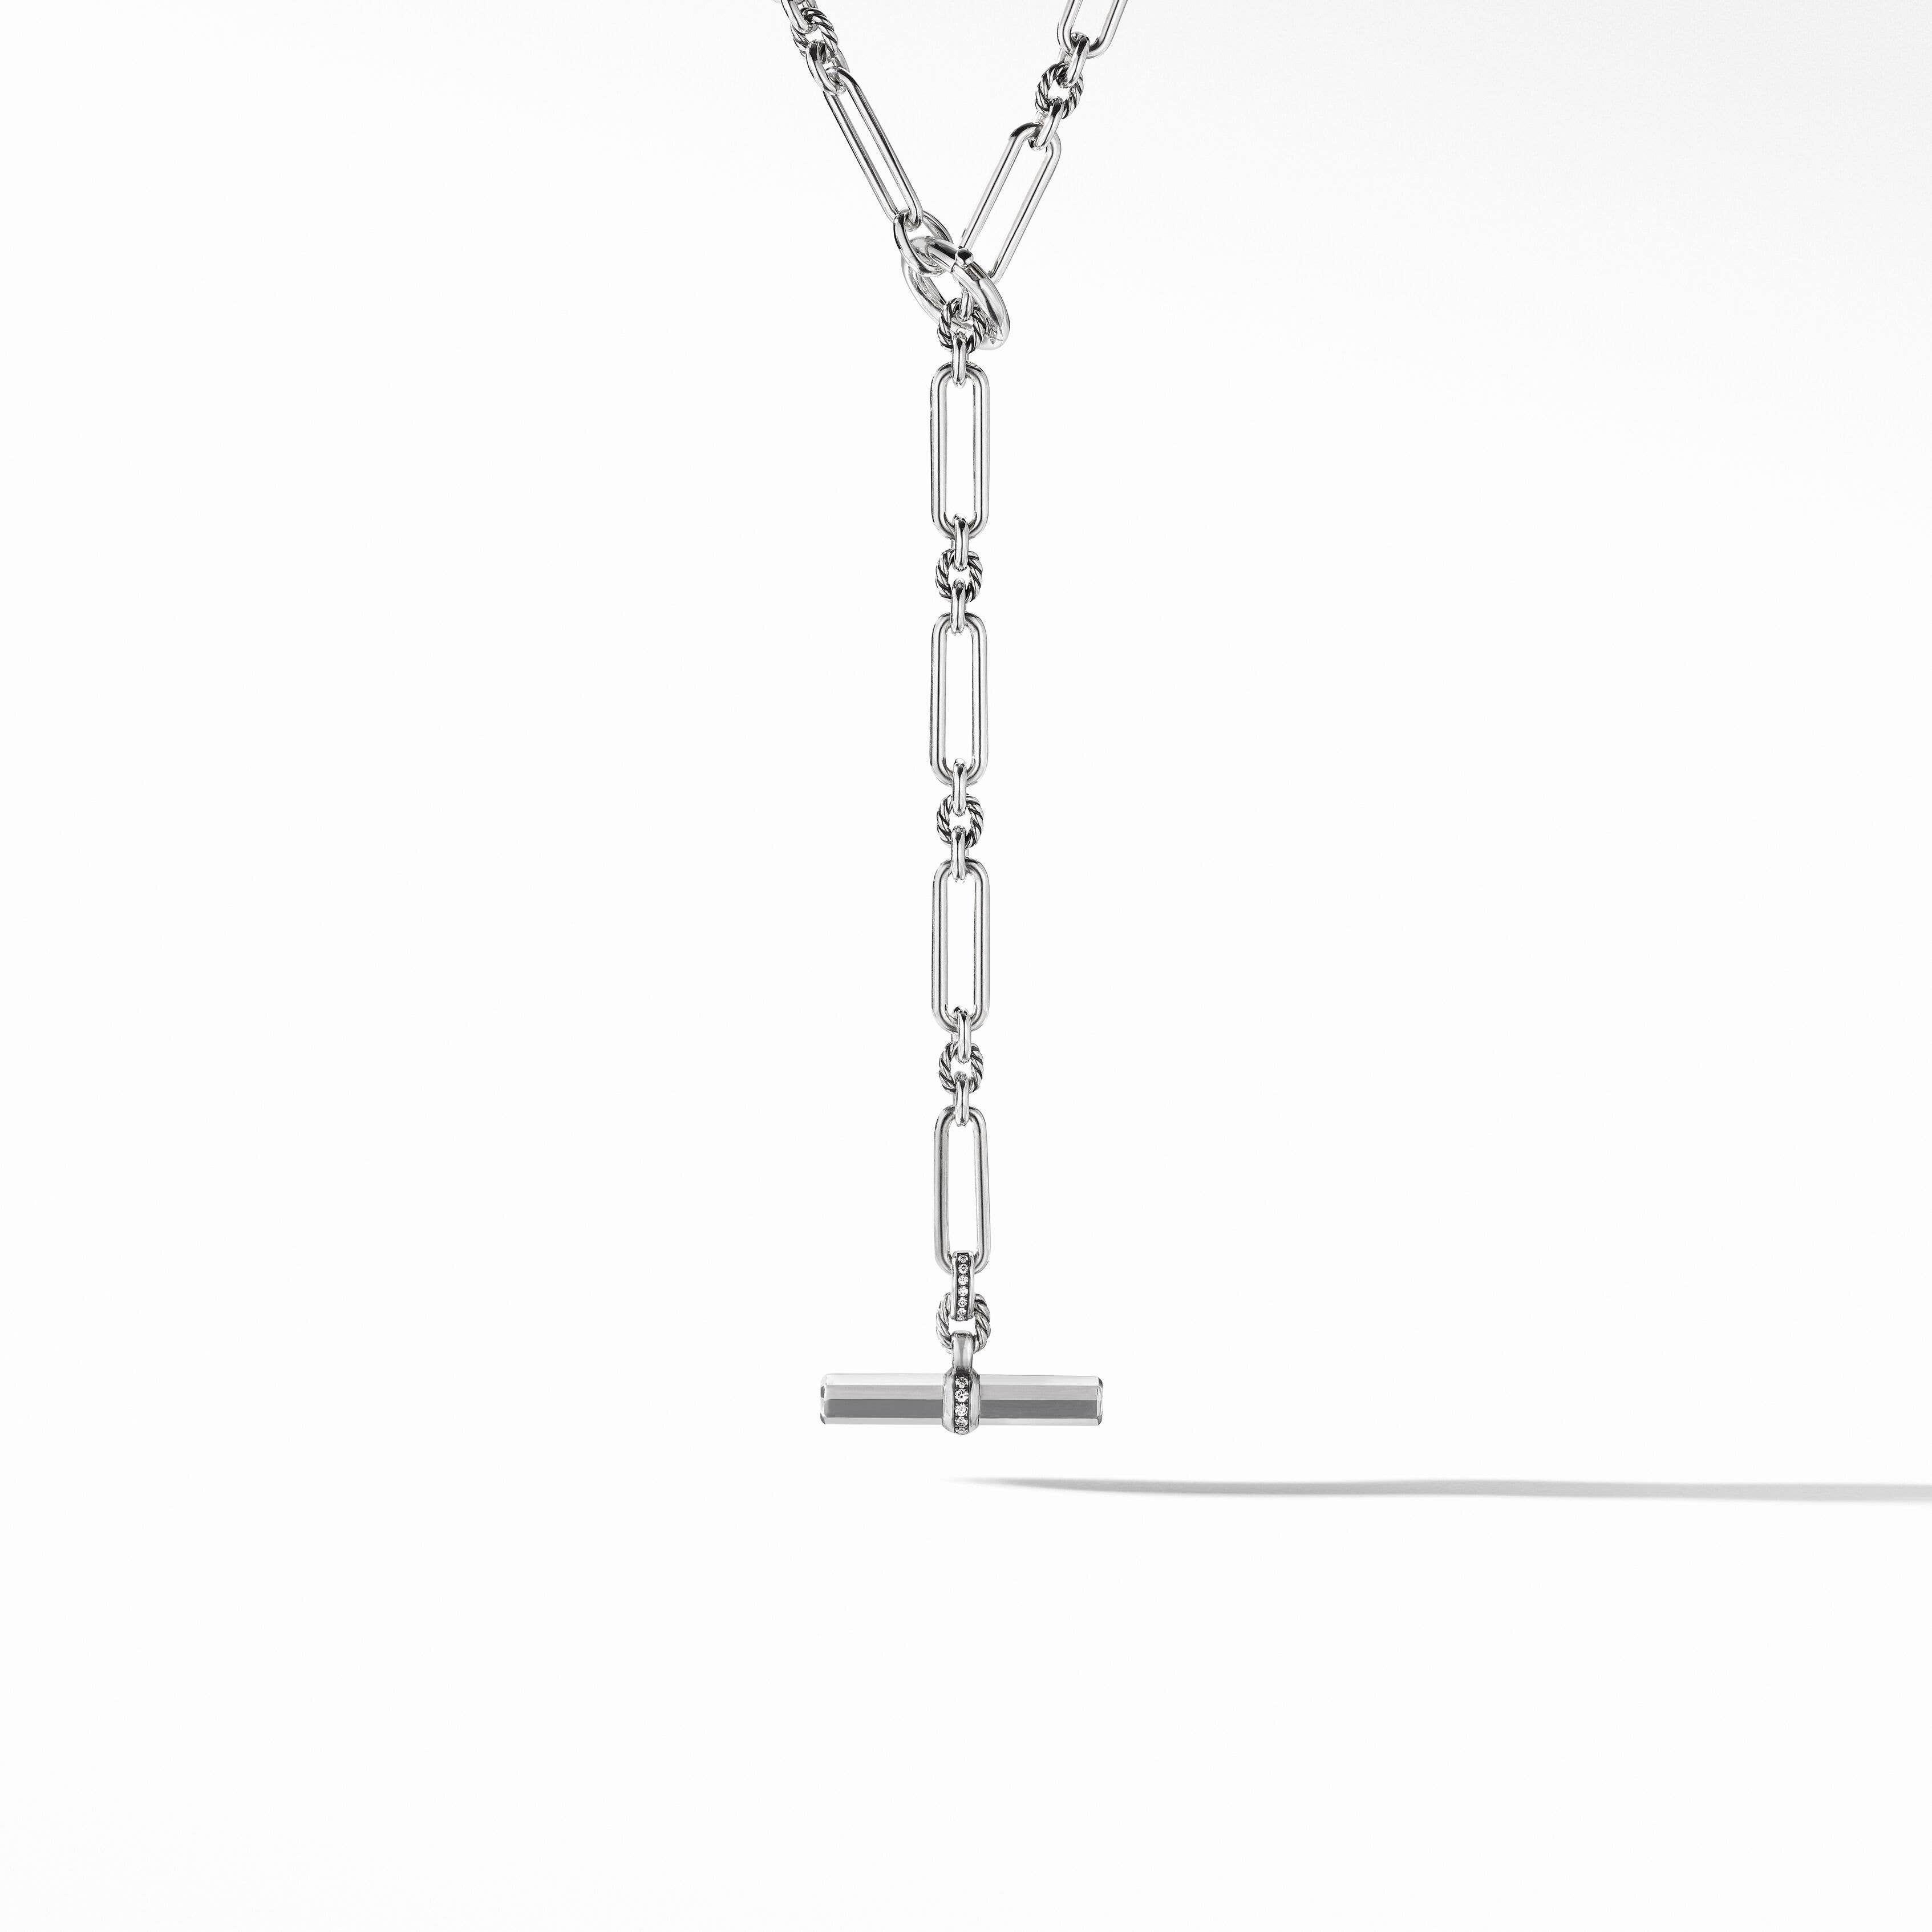 Lexington Y Chain Necklace in Sterling Silver with Pavé Diamonds